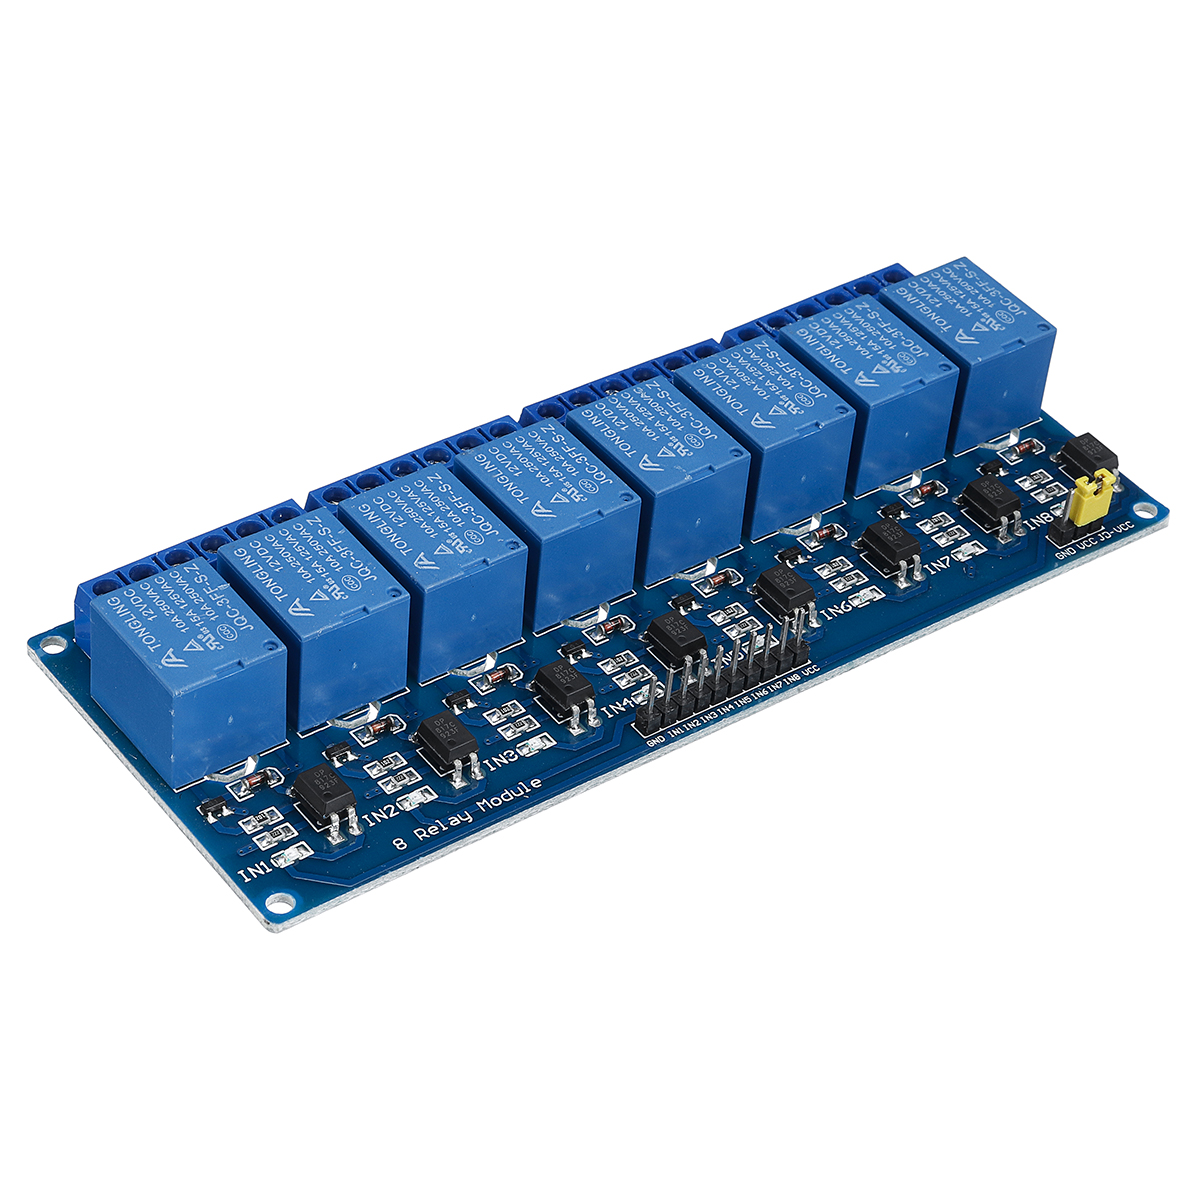 12 V 1/2/4/8/16 Channel Relay Module with Optocoupler for PIC AVR DSP ARM Arduino 